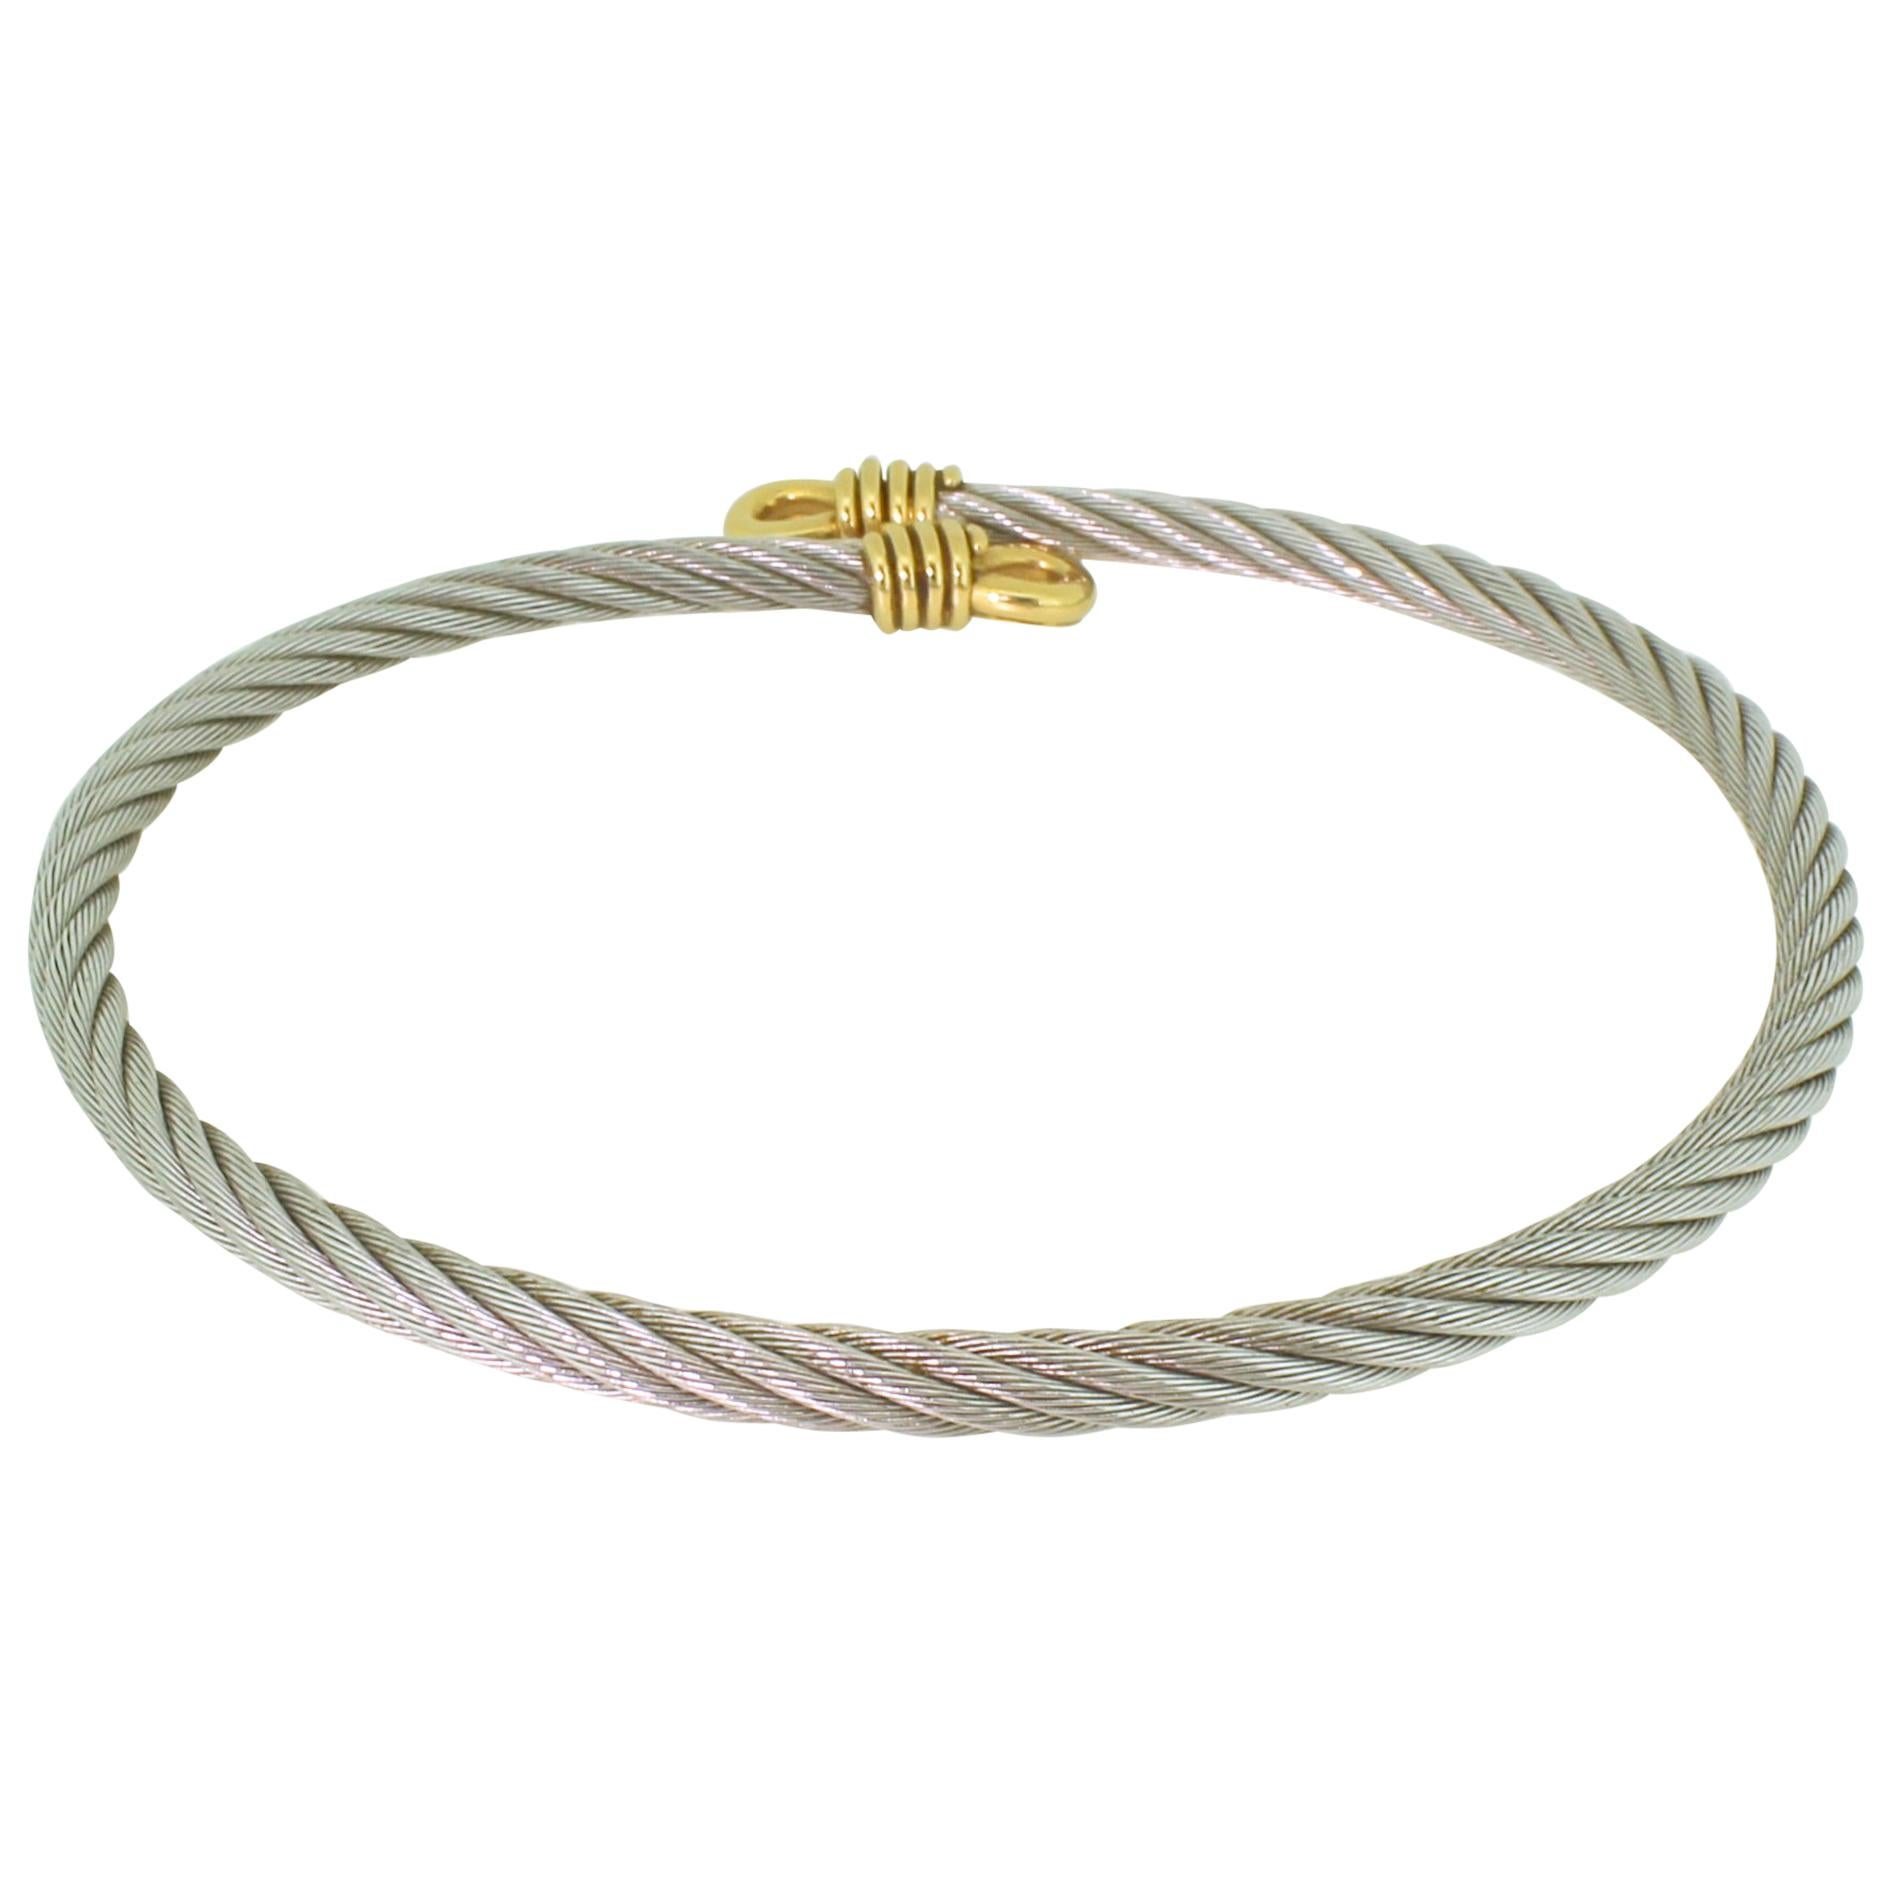 Fred of Paris ‘Force 10’ 18 Karat Gold and Steel Cable Choker Necklace For Sale